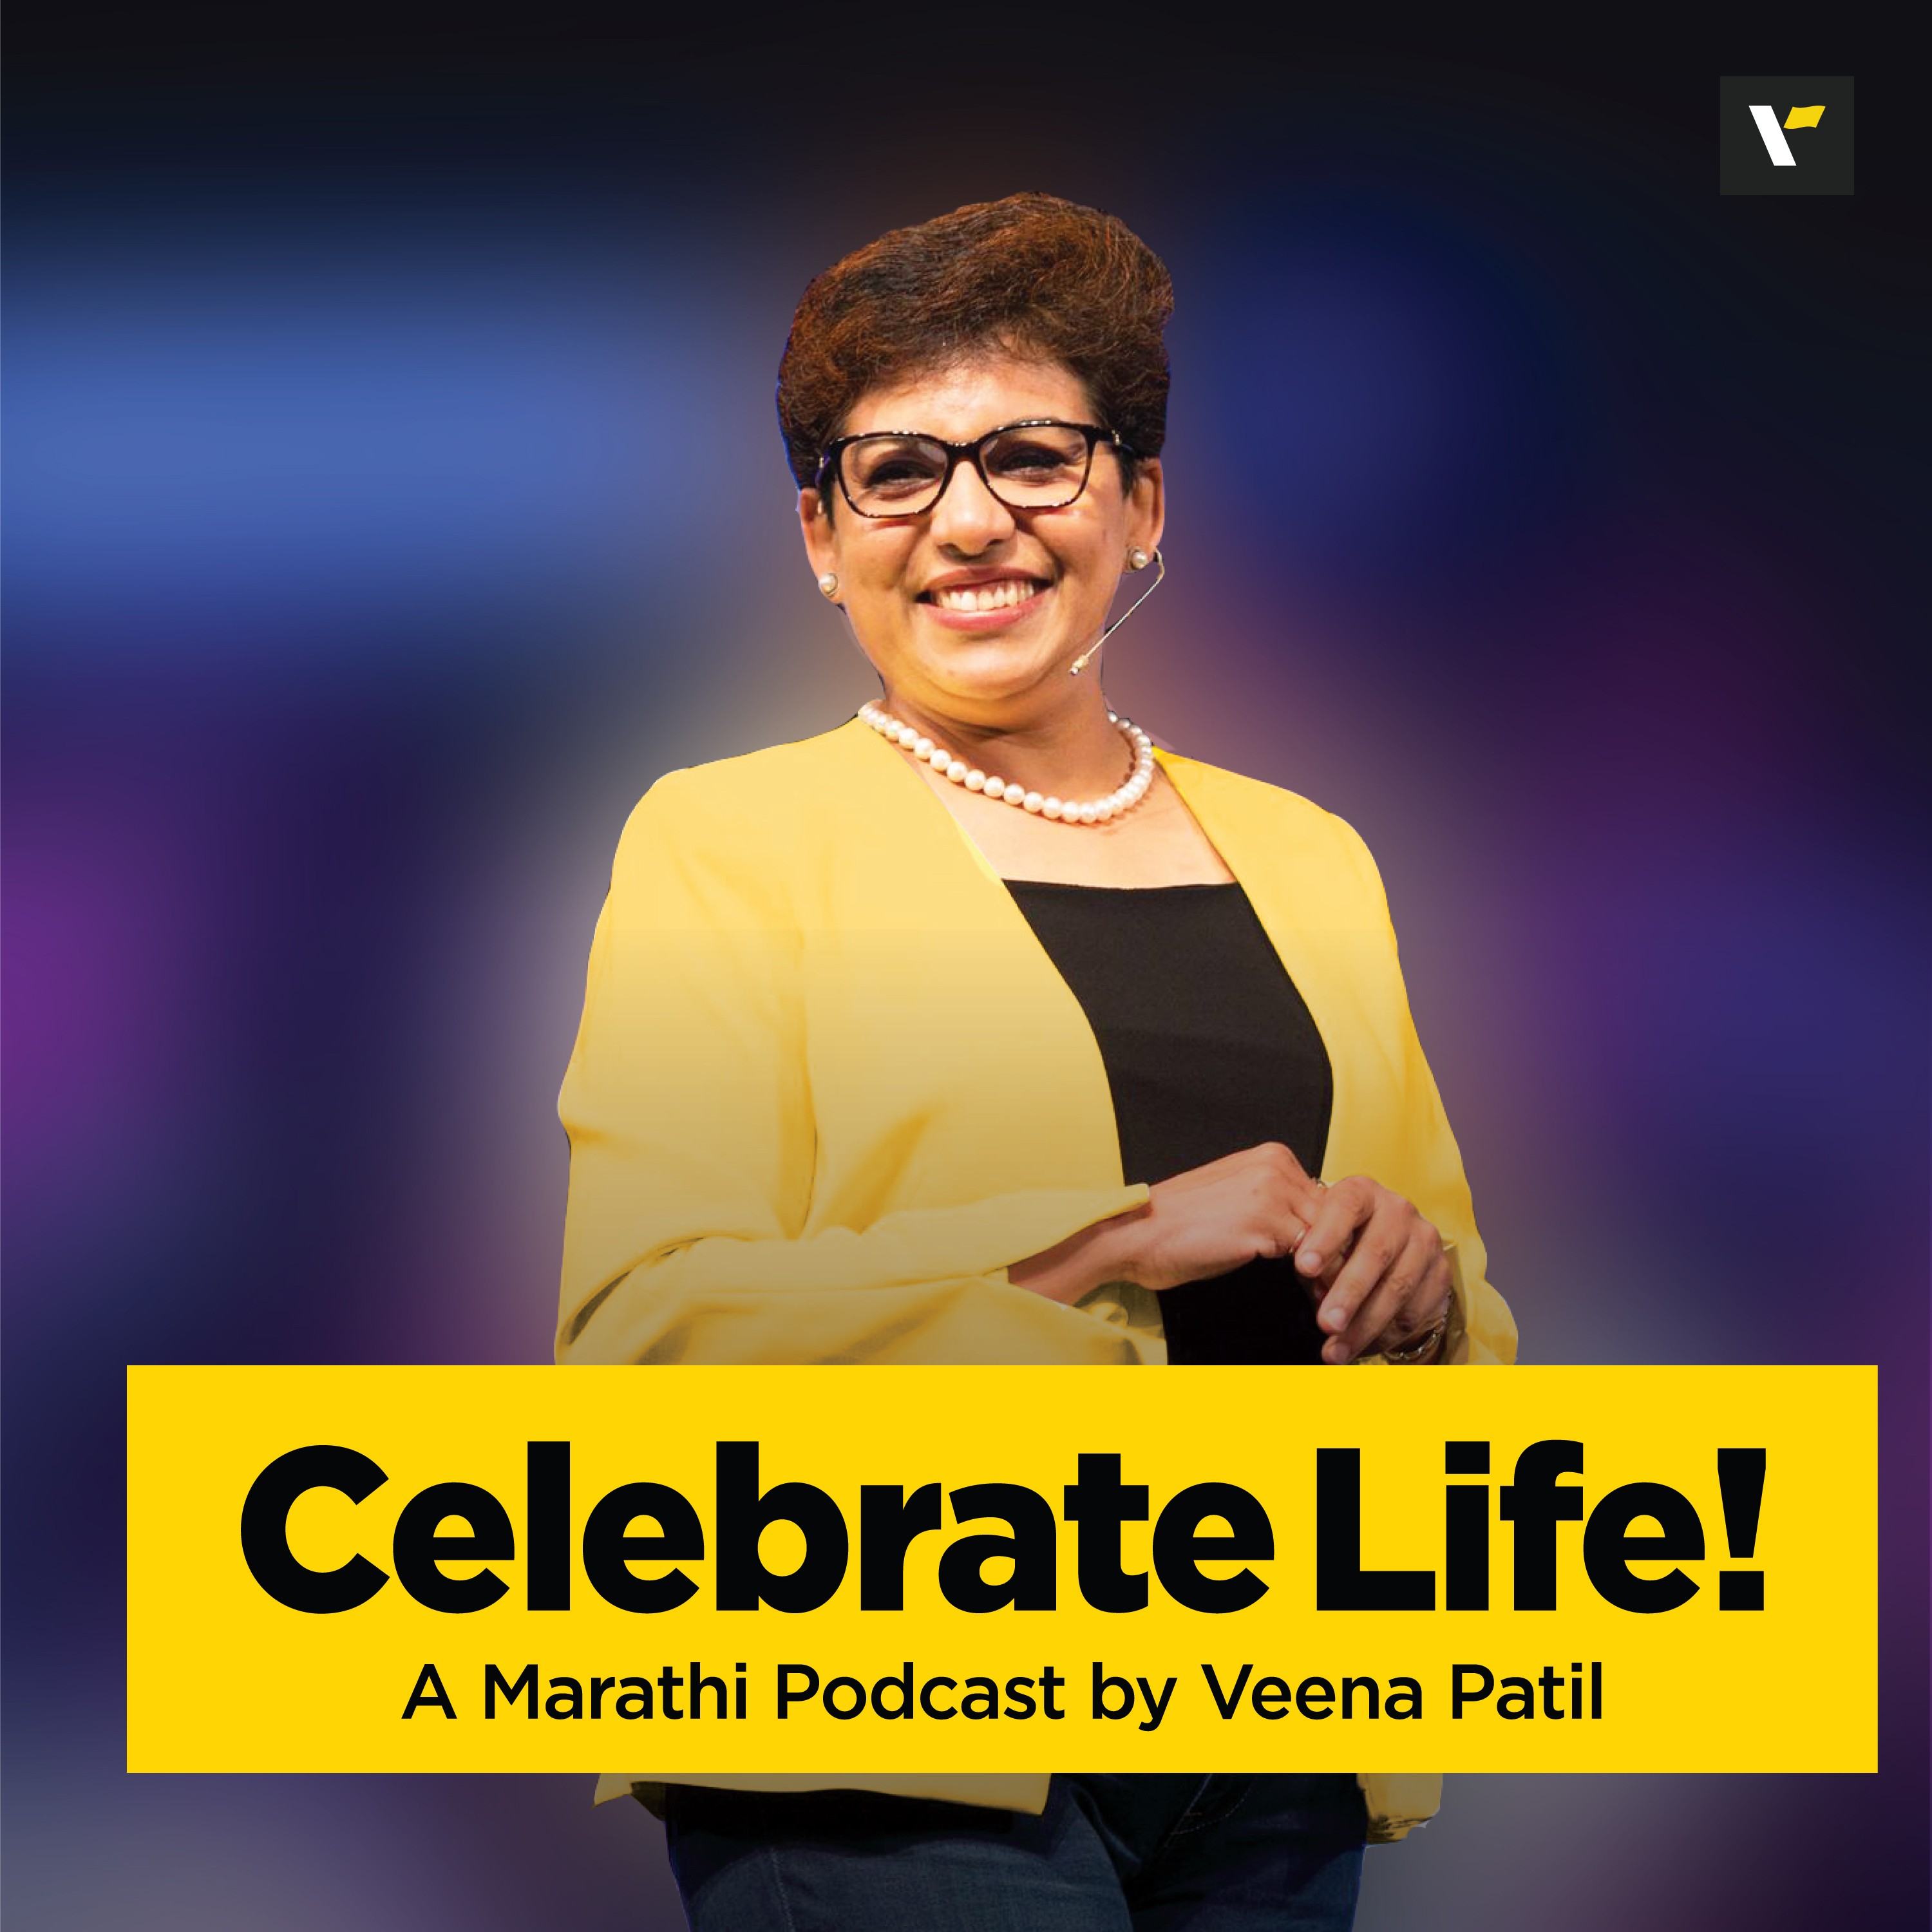 Life Stories by Veena Patil